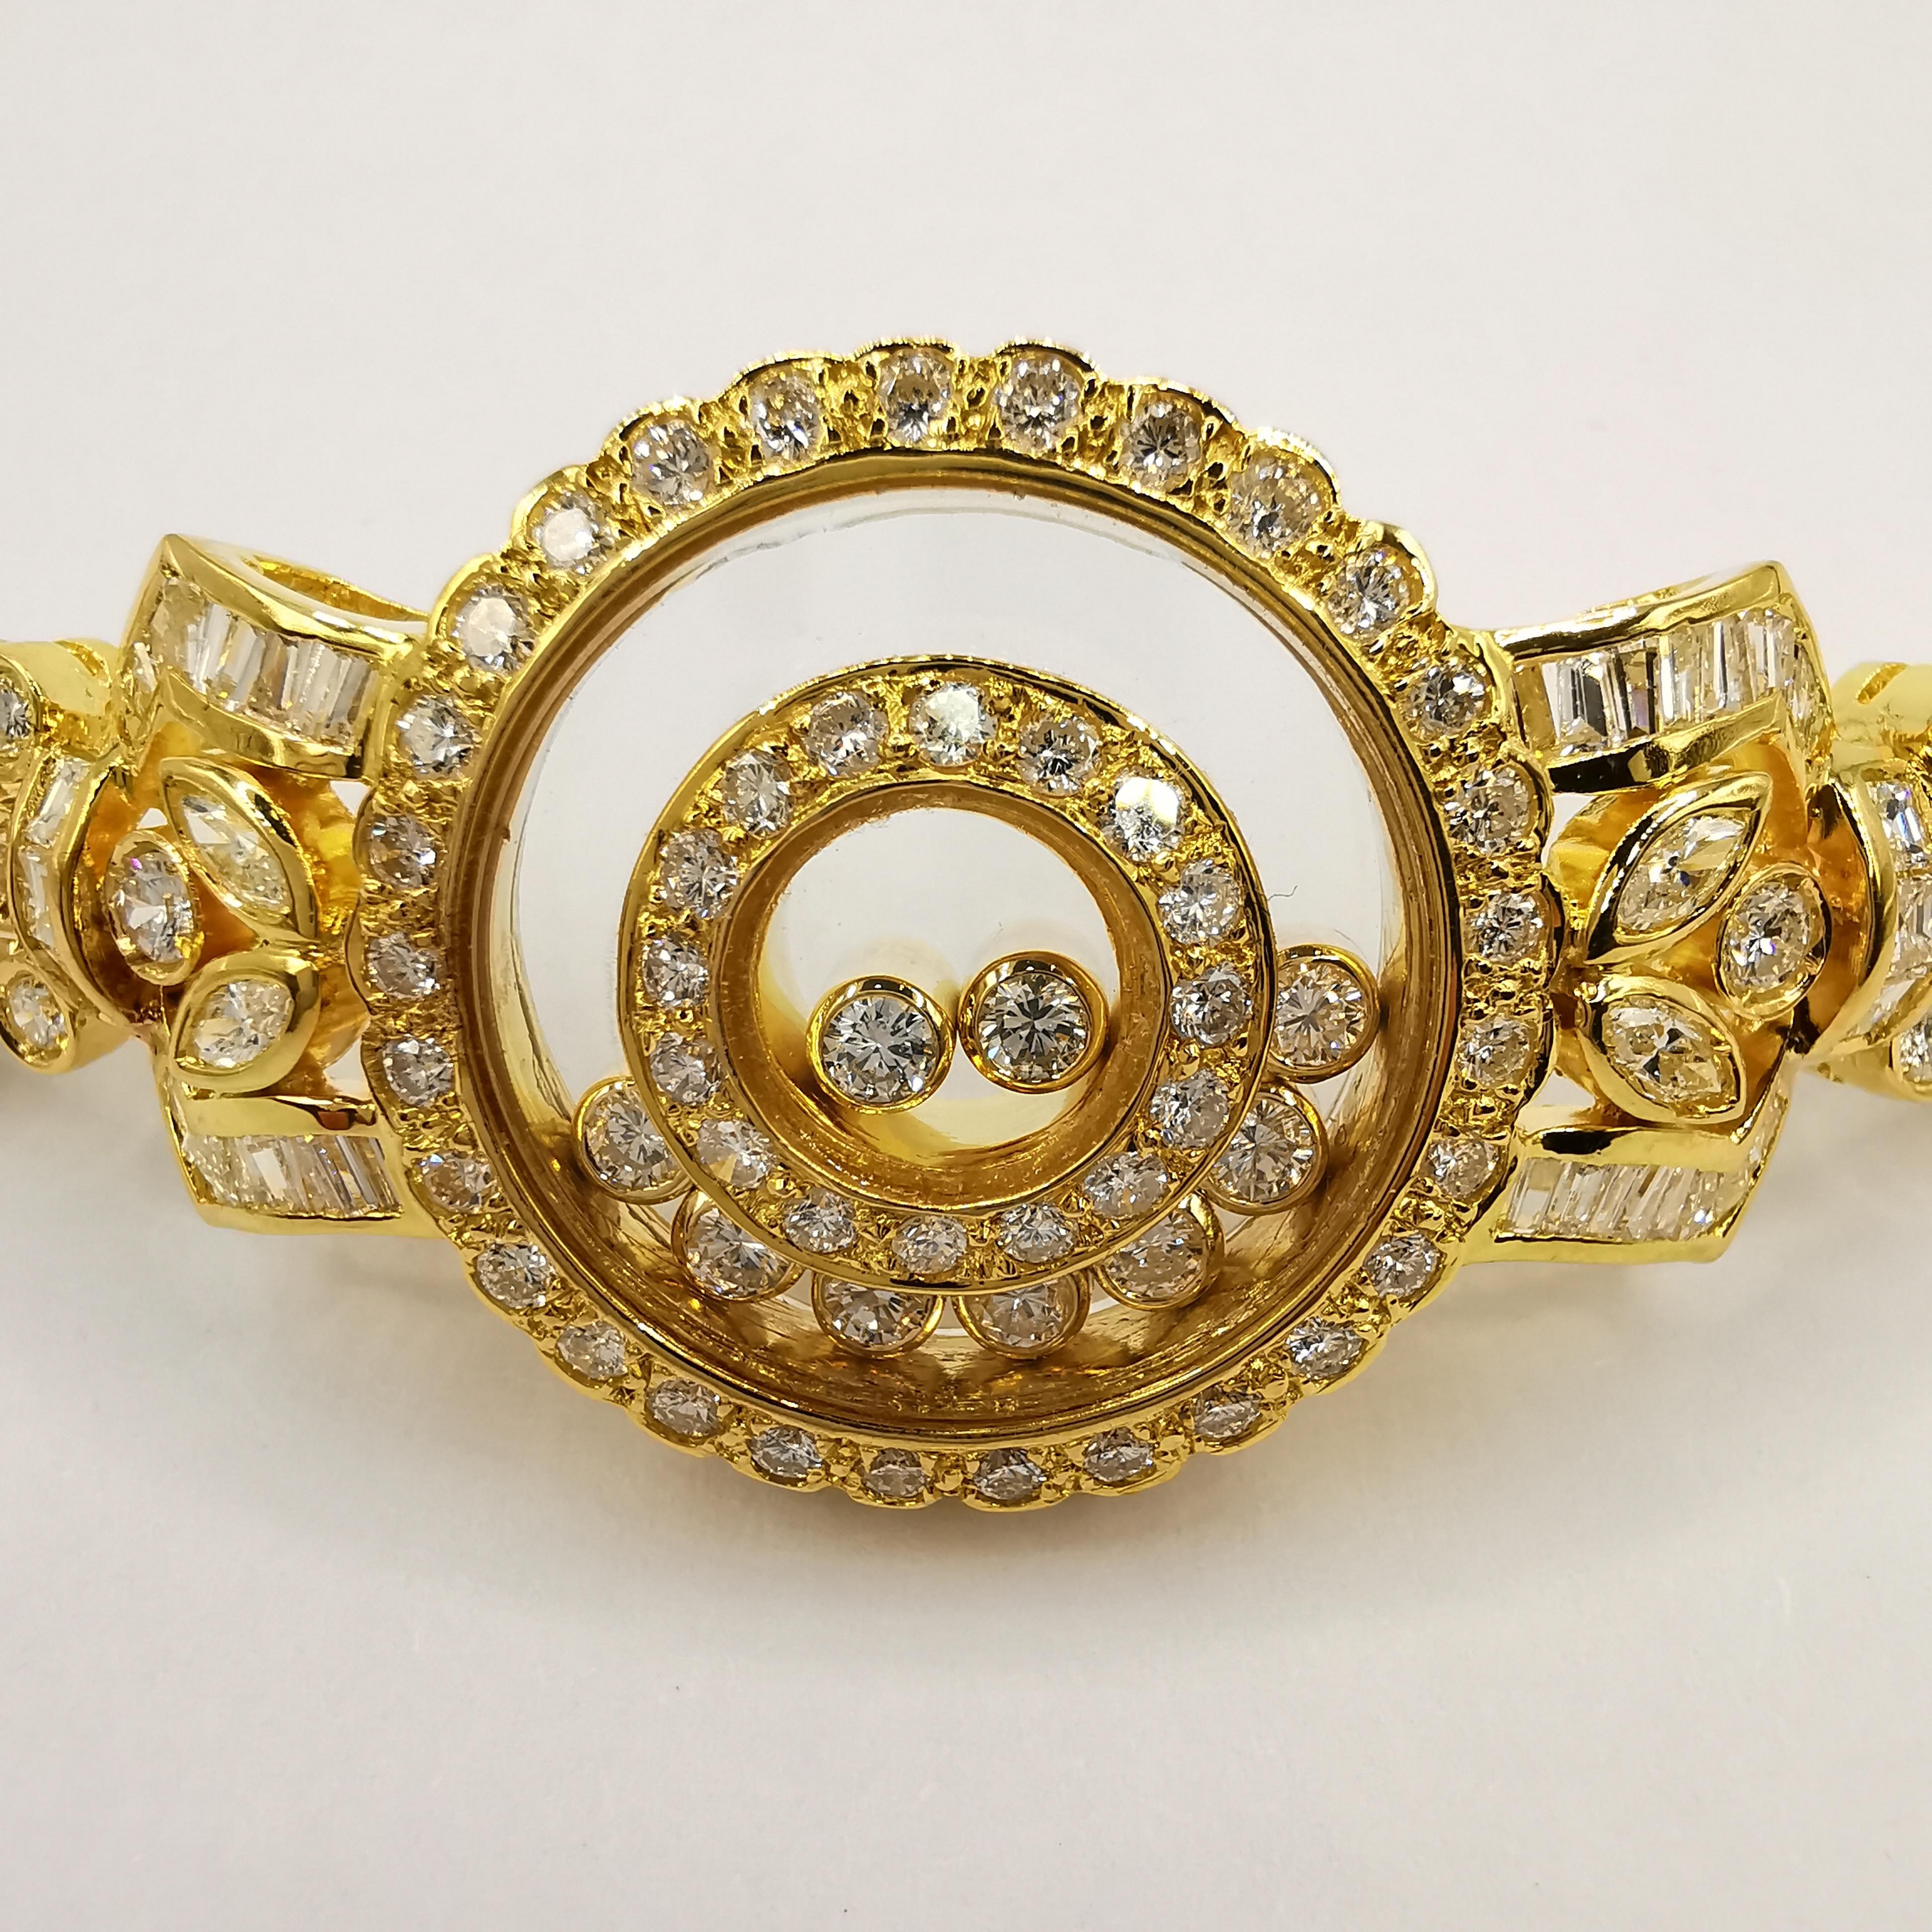 This 5.42 Carat Happy Diamond Bracelet in 18K Yellow Gold is a lavish piece of jewelry that exudes elegance and sophistication. The centerpiece features 9 round cut moving diamonds, totaling approximately 0.45 carats, with 2 of the moving diamonds